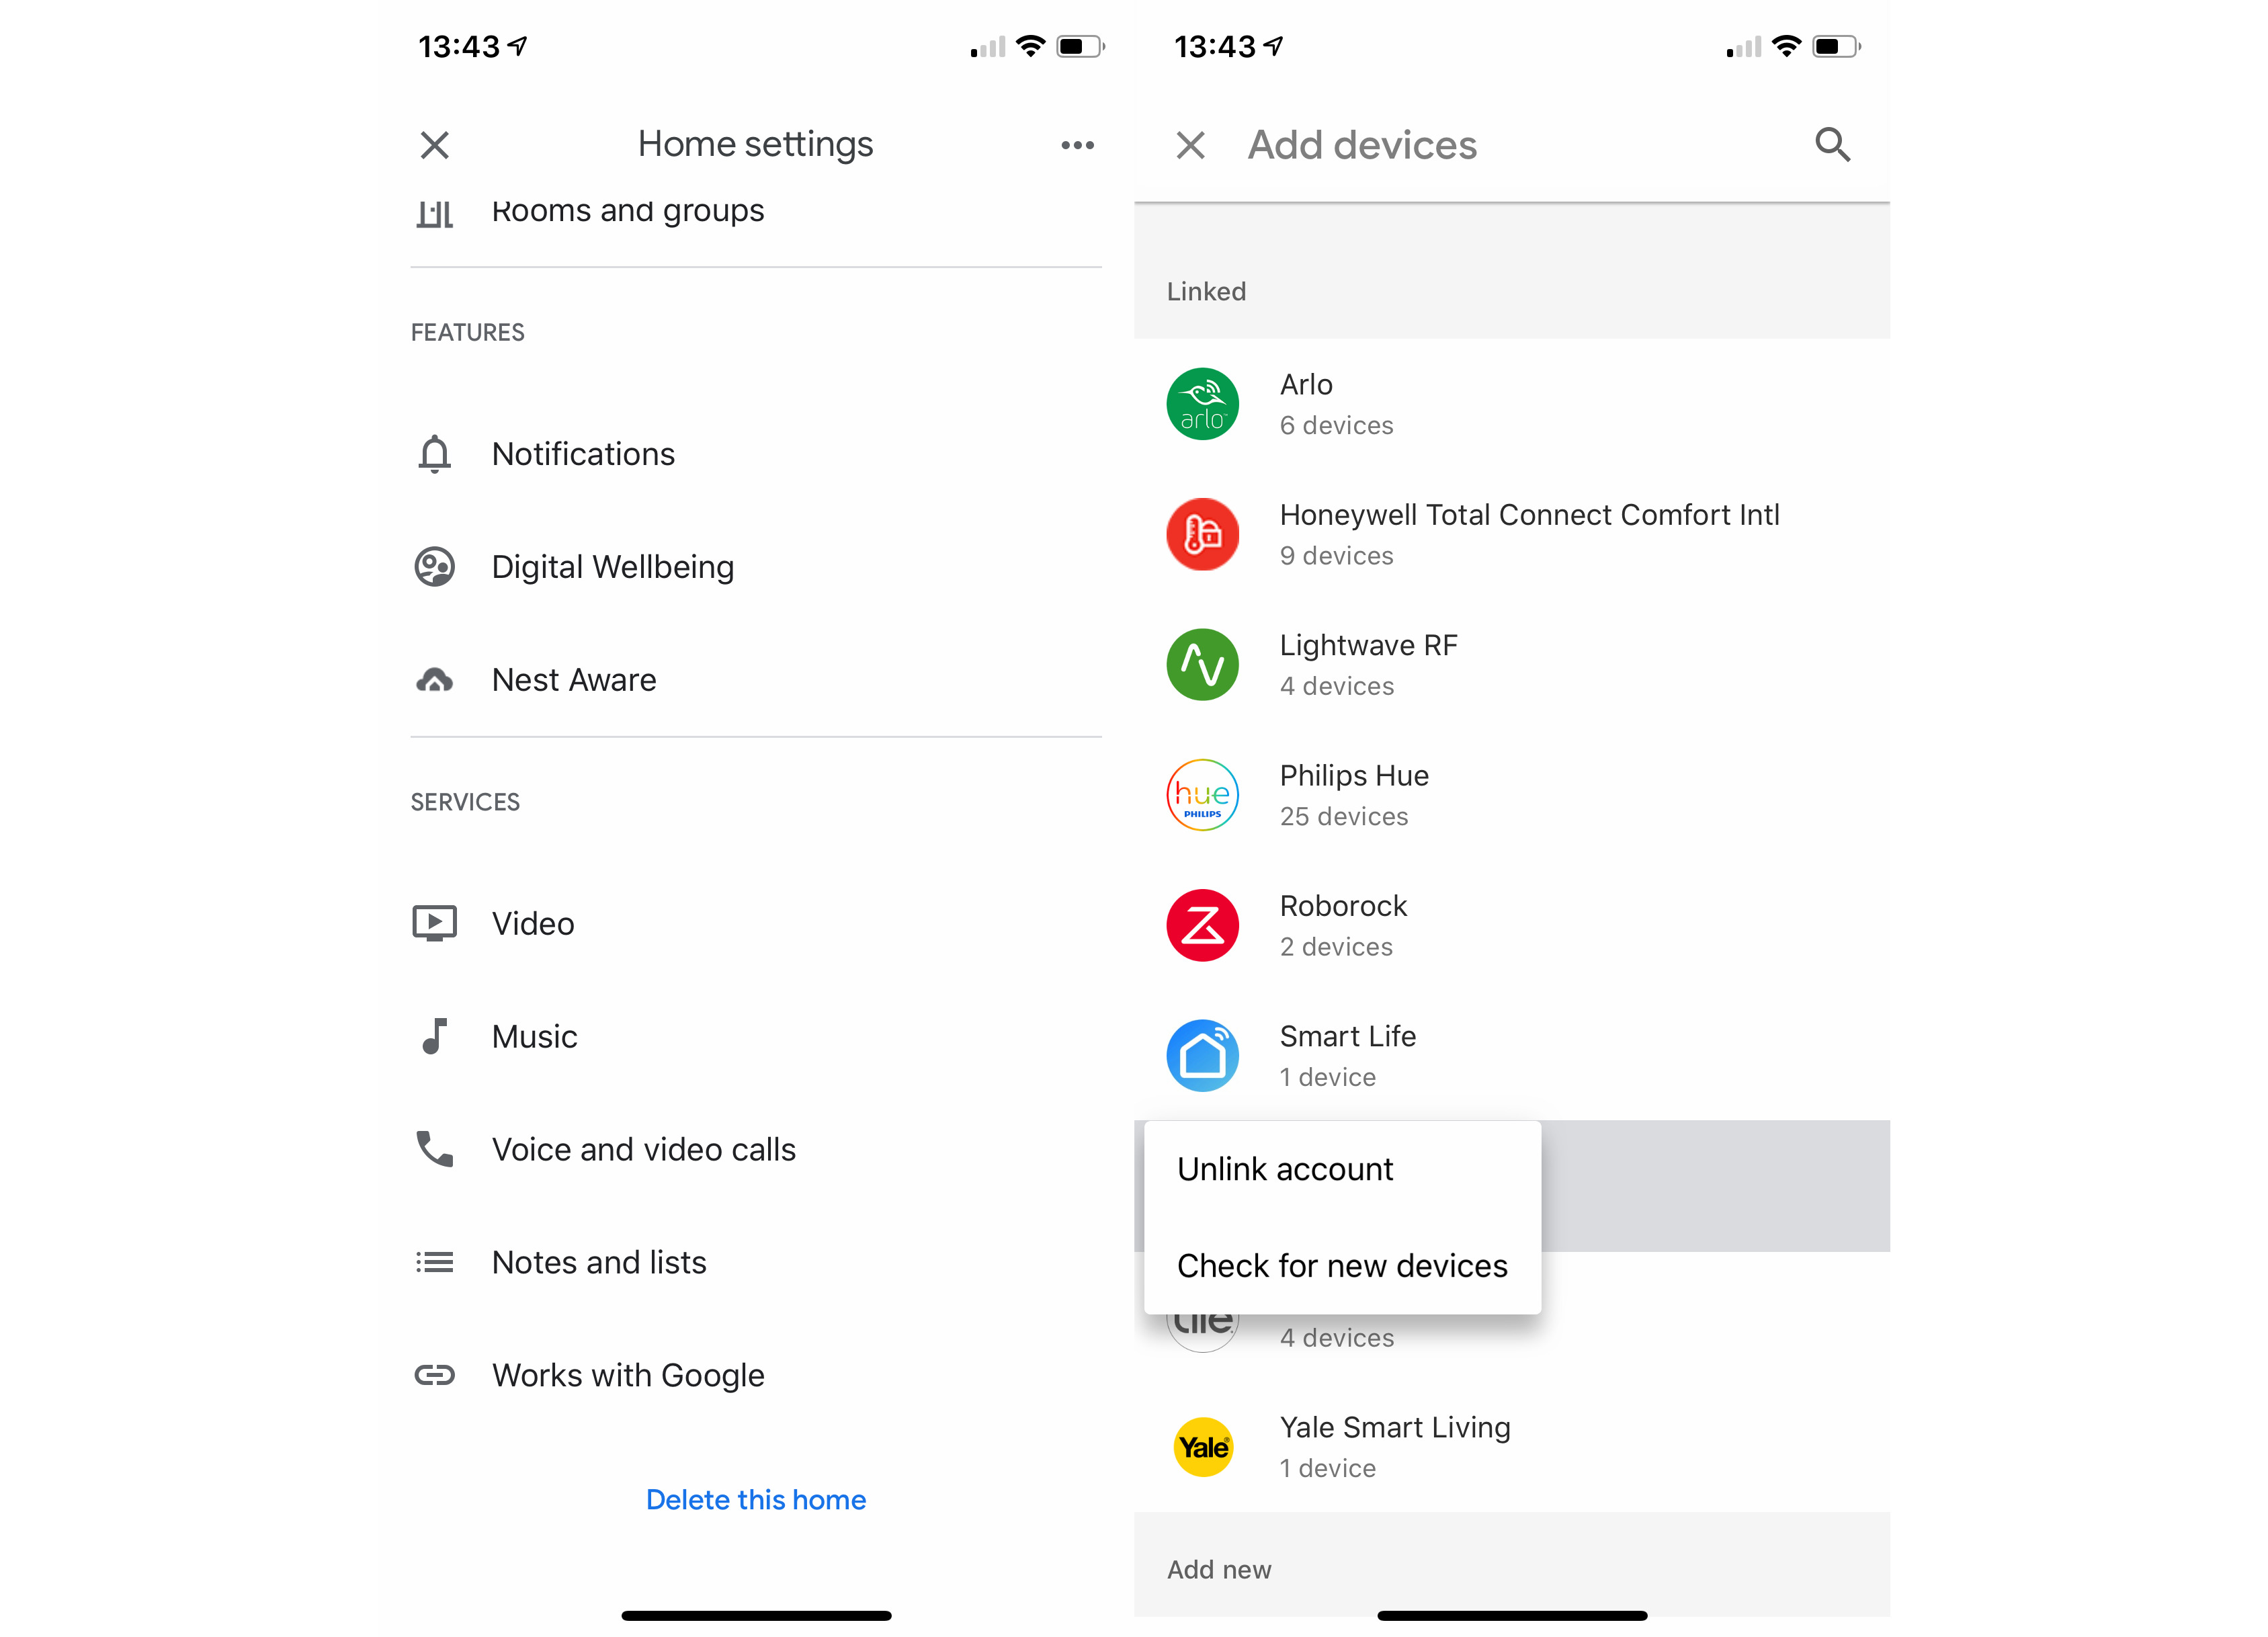 6 Google Assistant Unlink and Relink SonosScreenshot from Sonos app about unlinking and relinking Google assistant